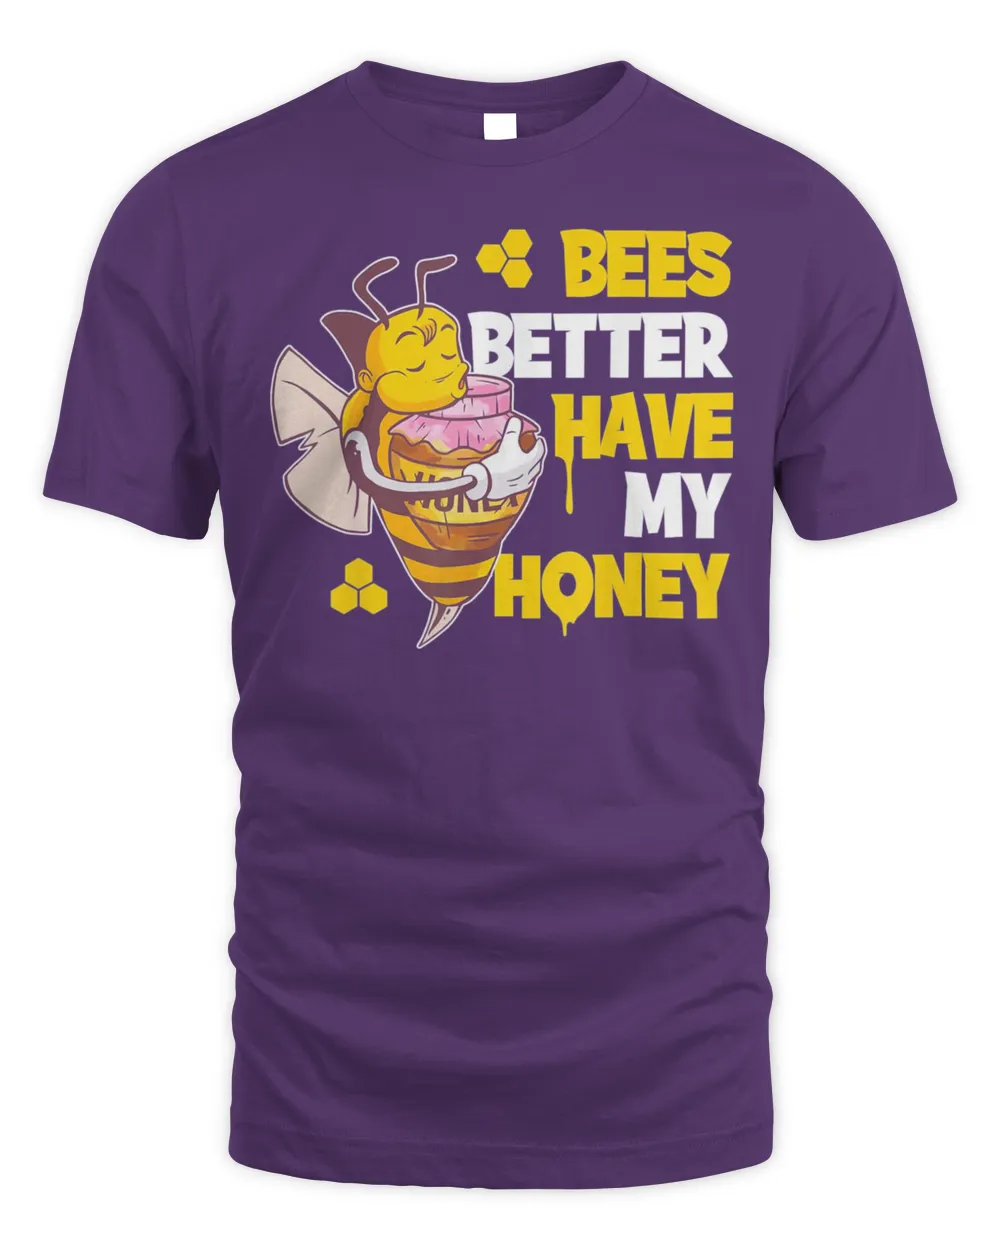 Bees Better Have My Honey T-Shirt